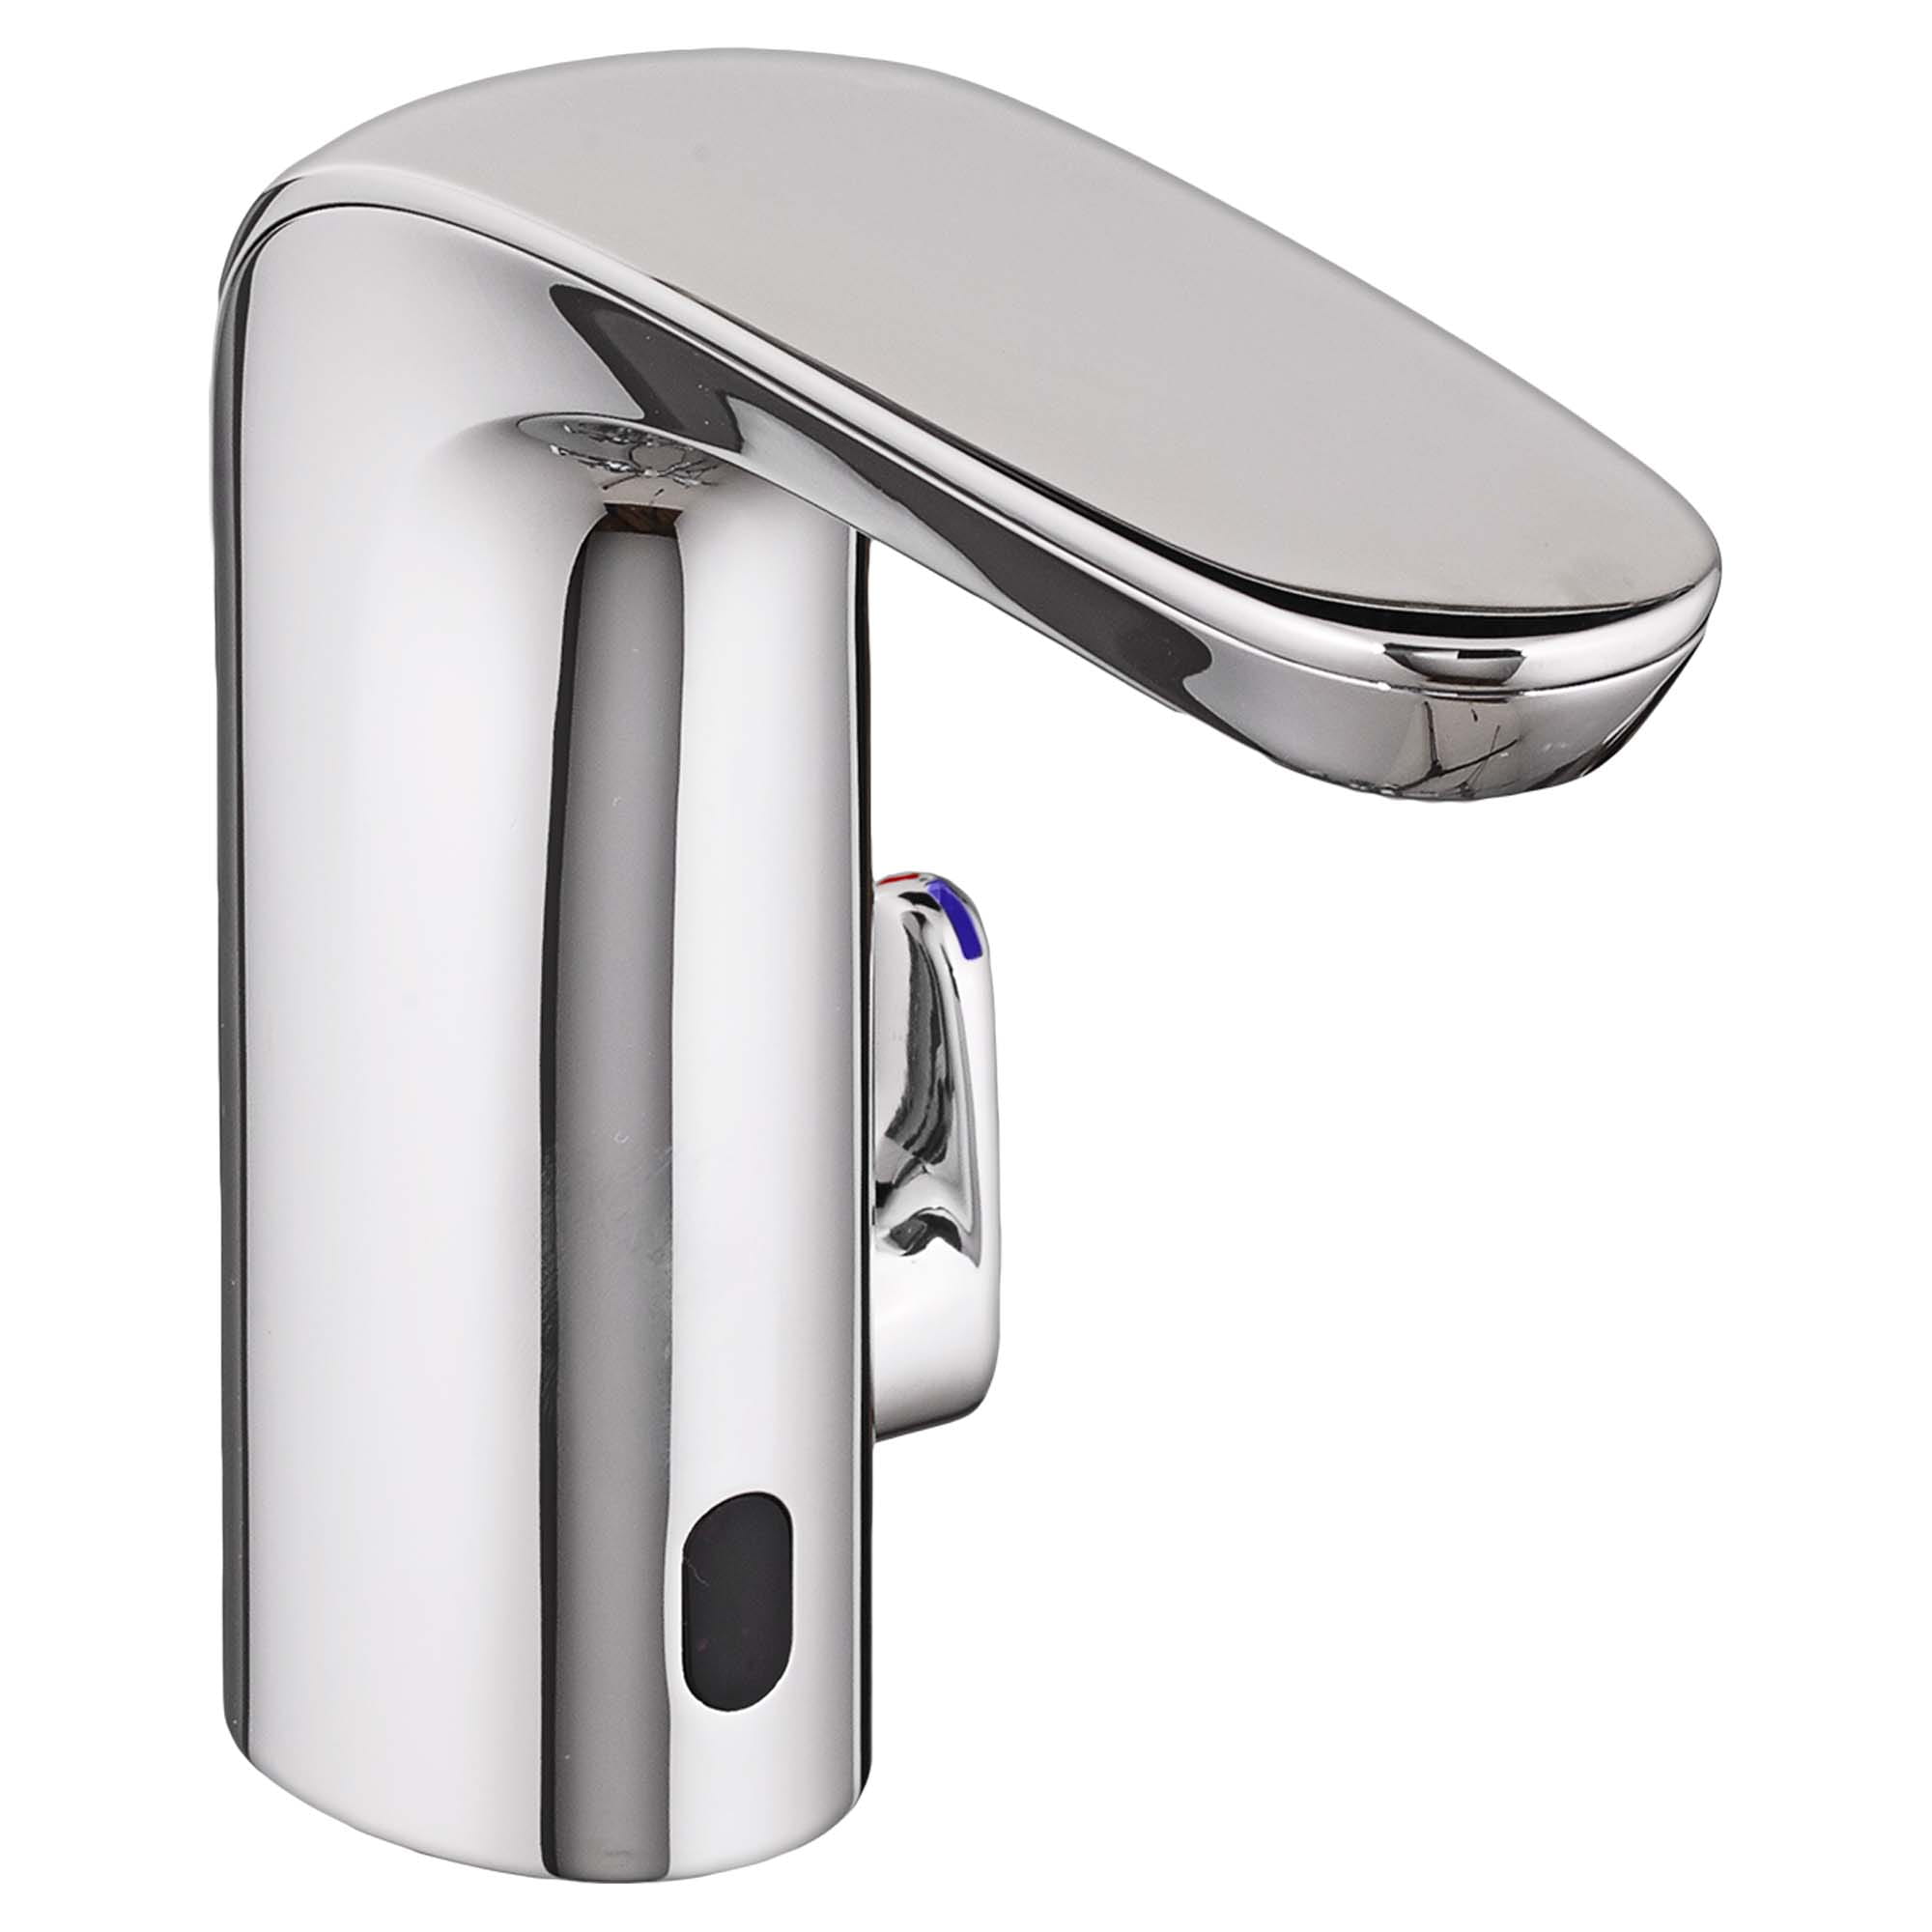 NextGen Selectronic Touchless Faucet Battery Powered With Above Deck Mixing 15 gpm 57 Lpm   BRUSHED NICKEL